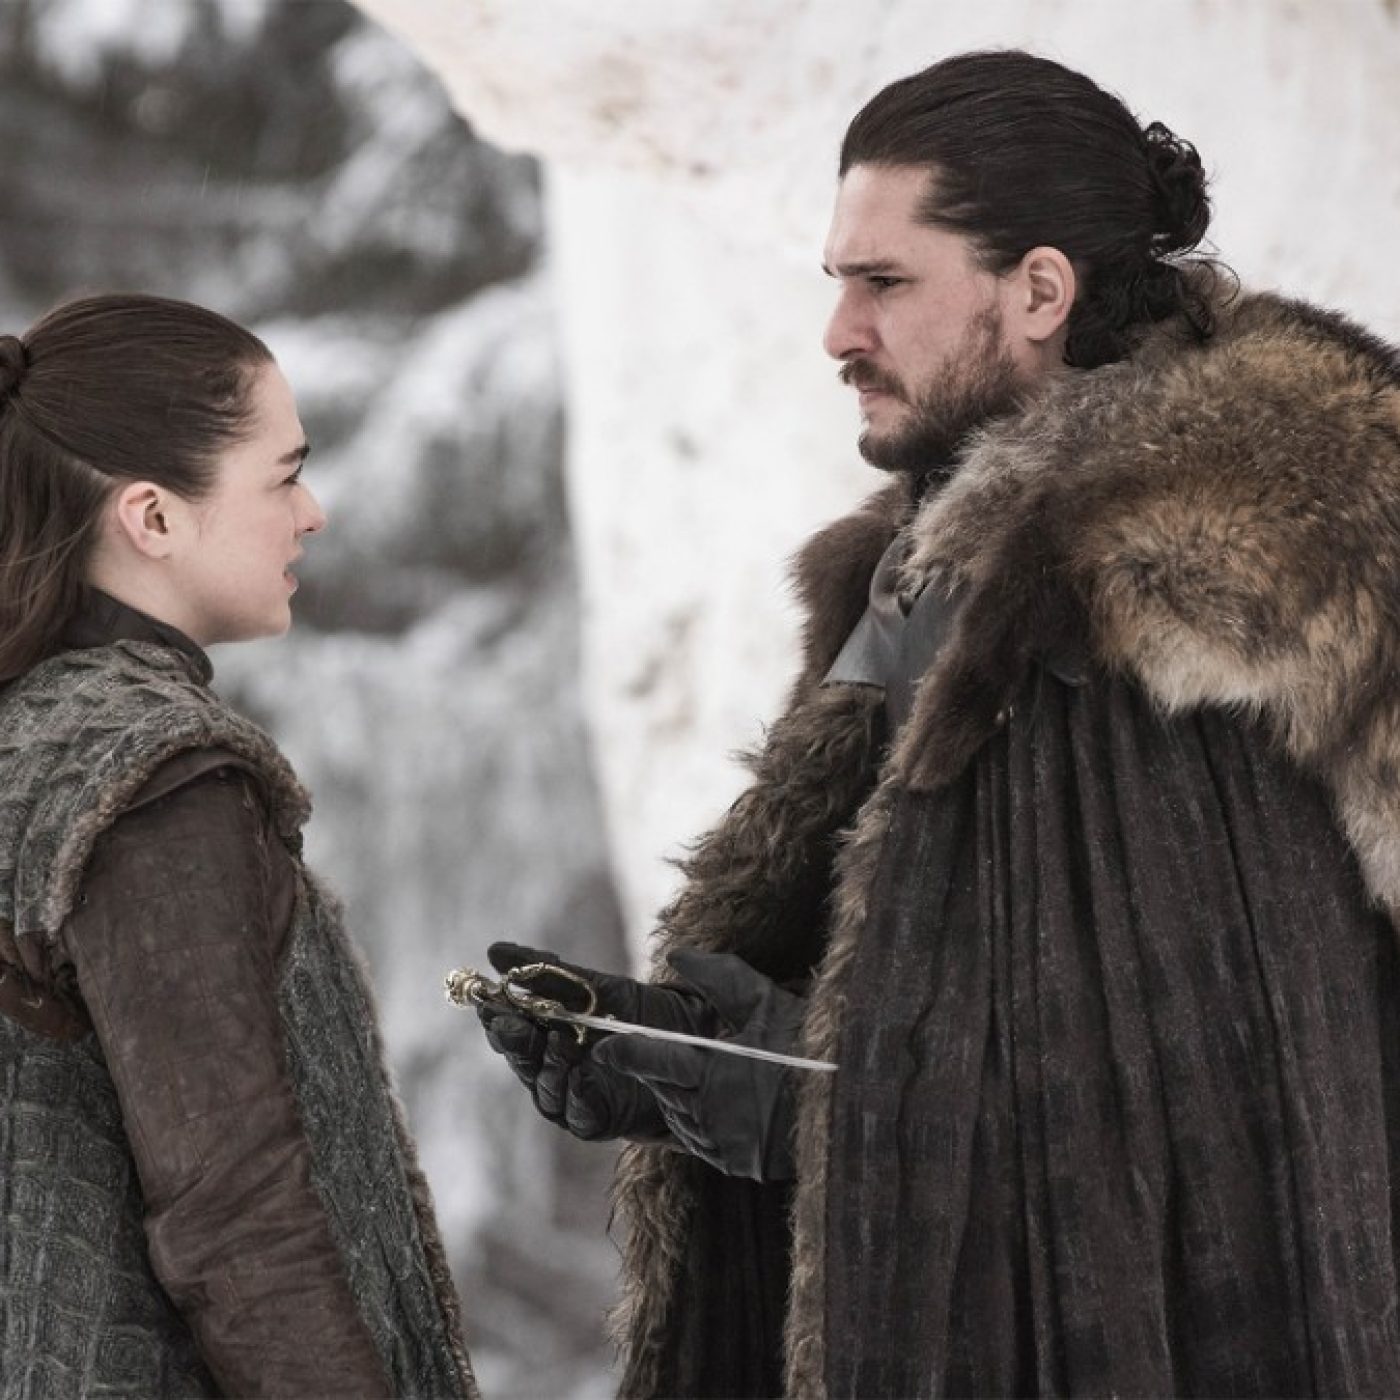 FIRST WATCH: “Game of Thrones” Season 1, Episode 1 “Winter is